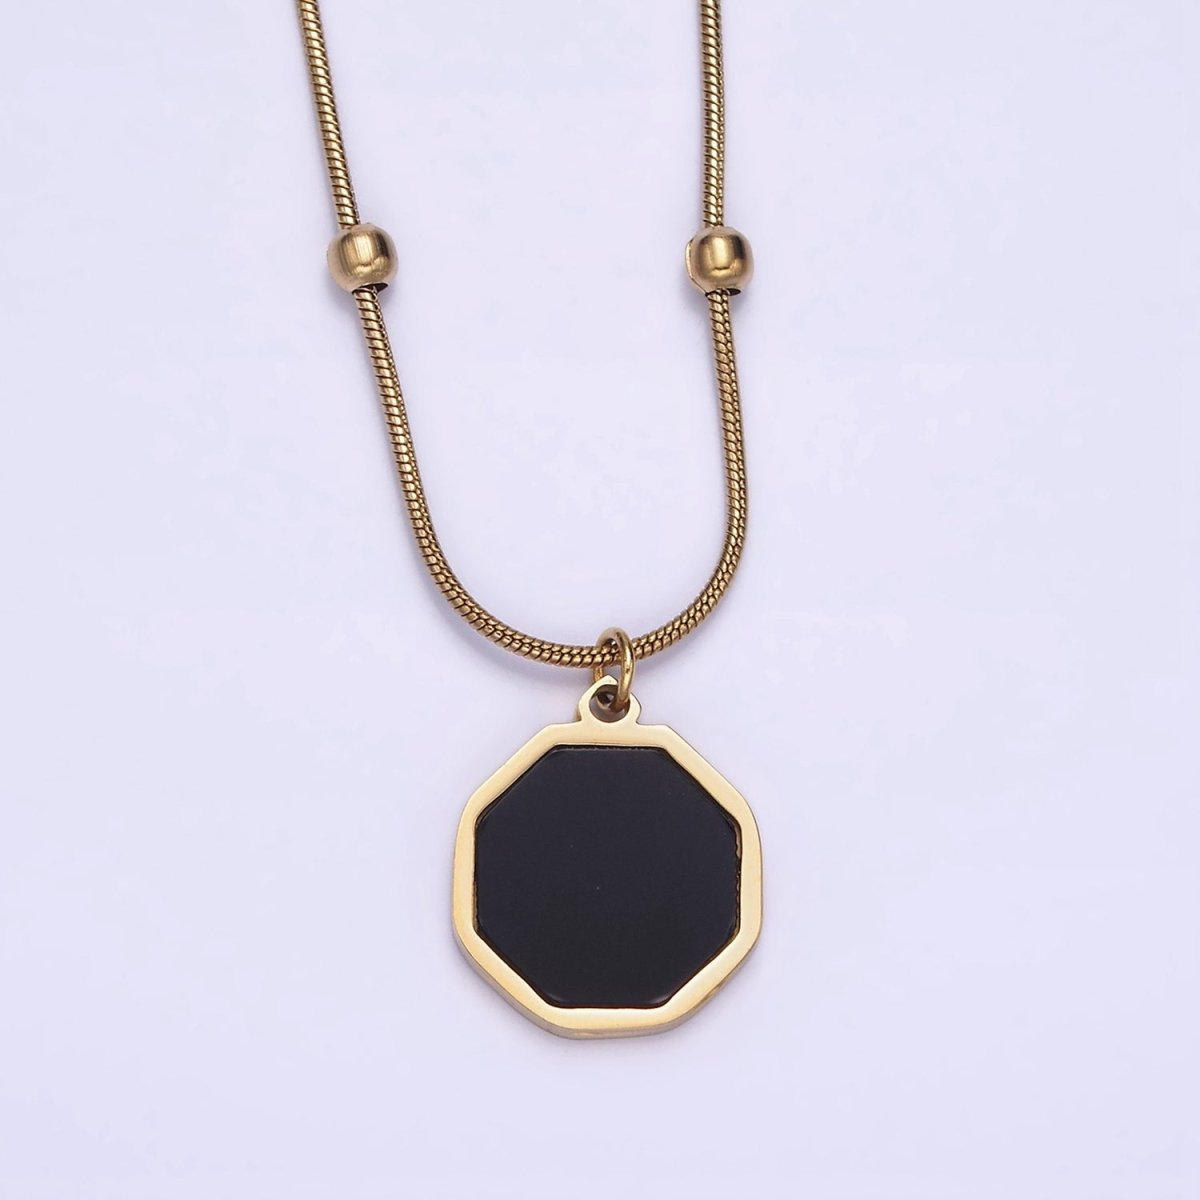 Stainless Steel Black Hexagonal Charm 17 Inch Satellite Snake Chain Necklace | WA-2035 Clearance Pricing - DLUXCA